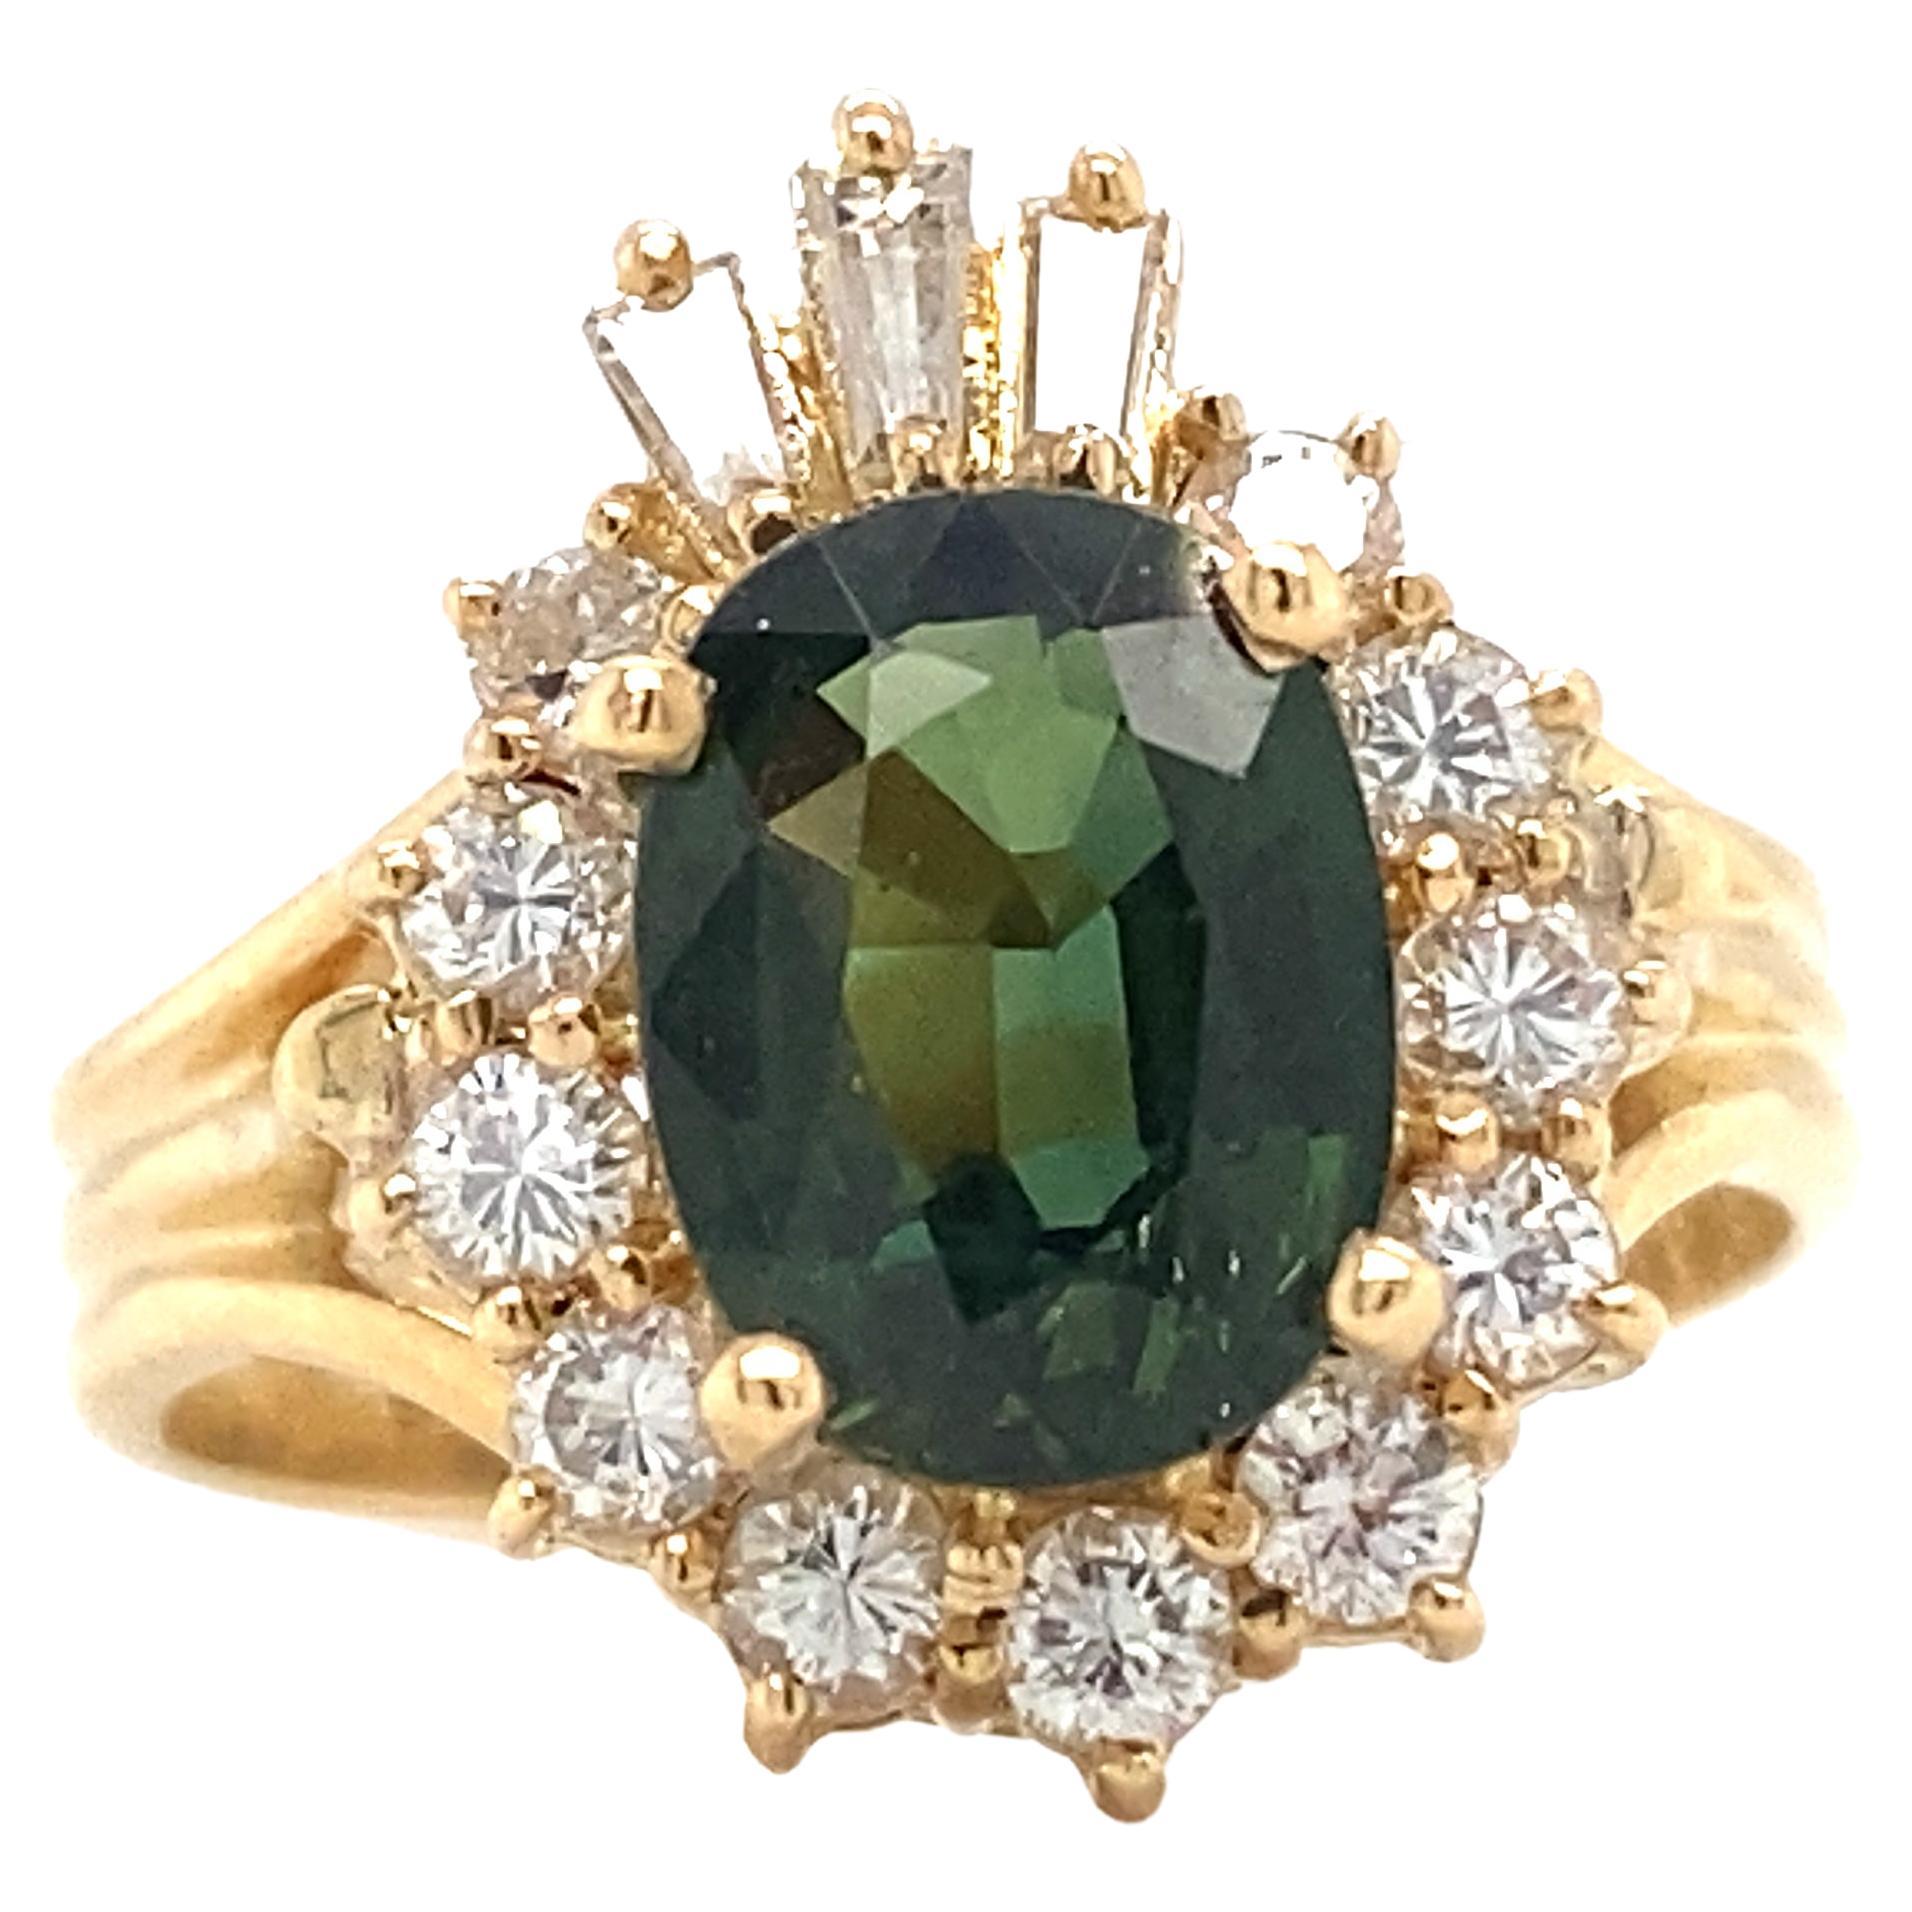 Item Details: This unique ring from Le Vian features a green sapphire with accent diamonds. The striking color of the green sapphire sits beautifully against the sparkling diamonds and yellow gold. All diamonds and sapphire are prong set. The